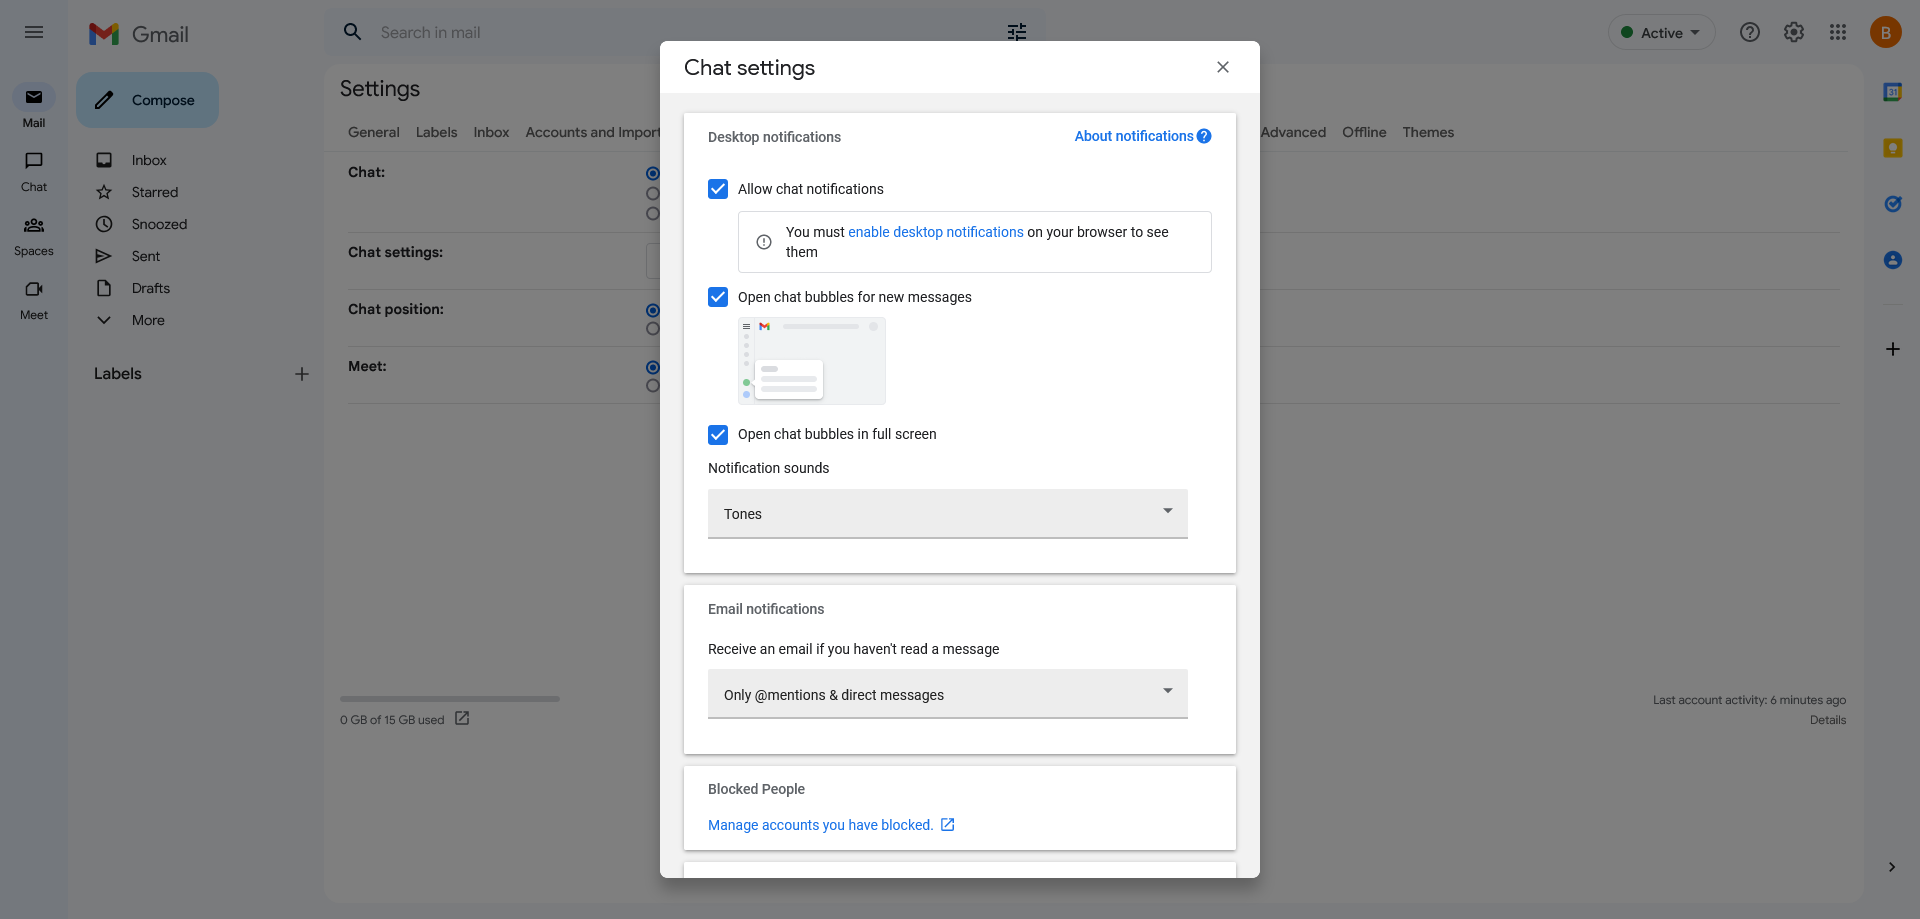 Advanced chat settings in Gmail's new 2022 design